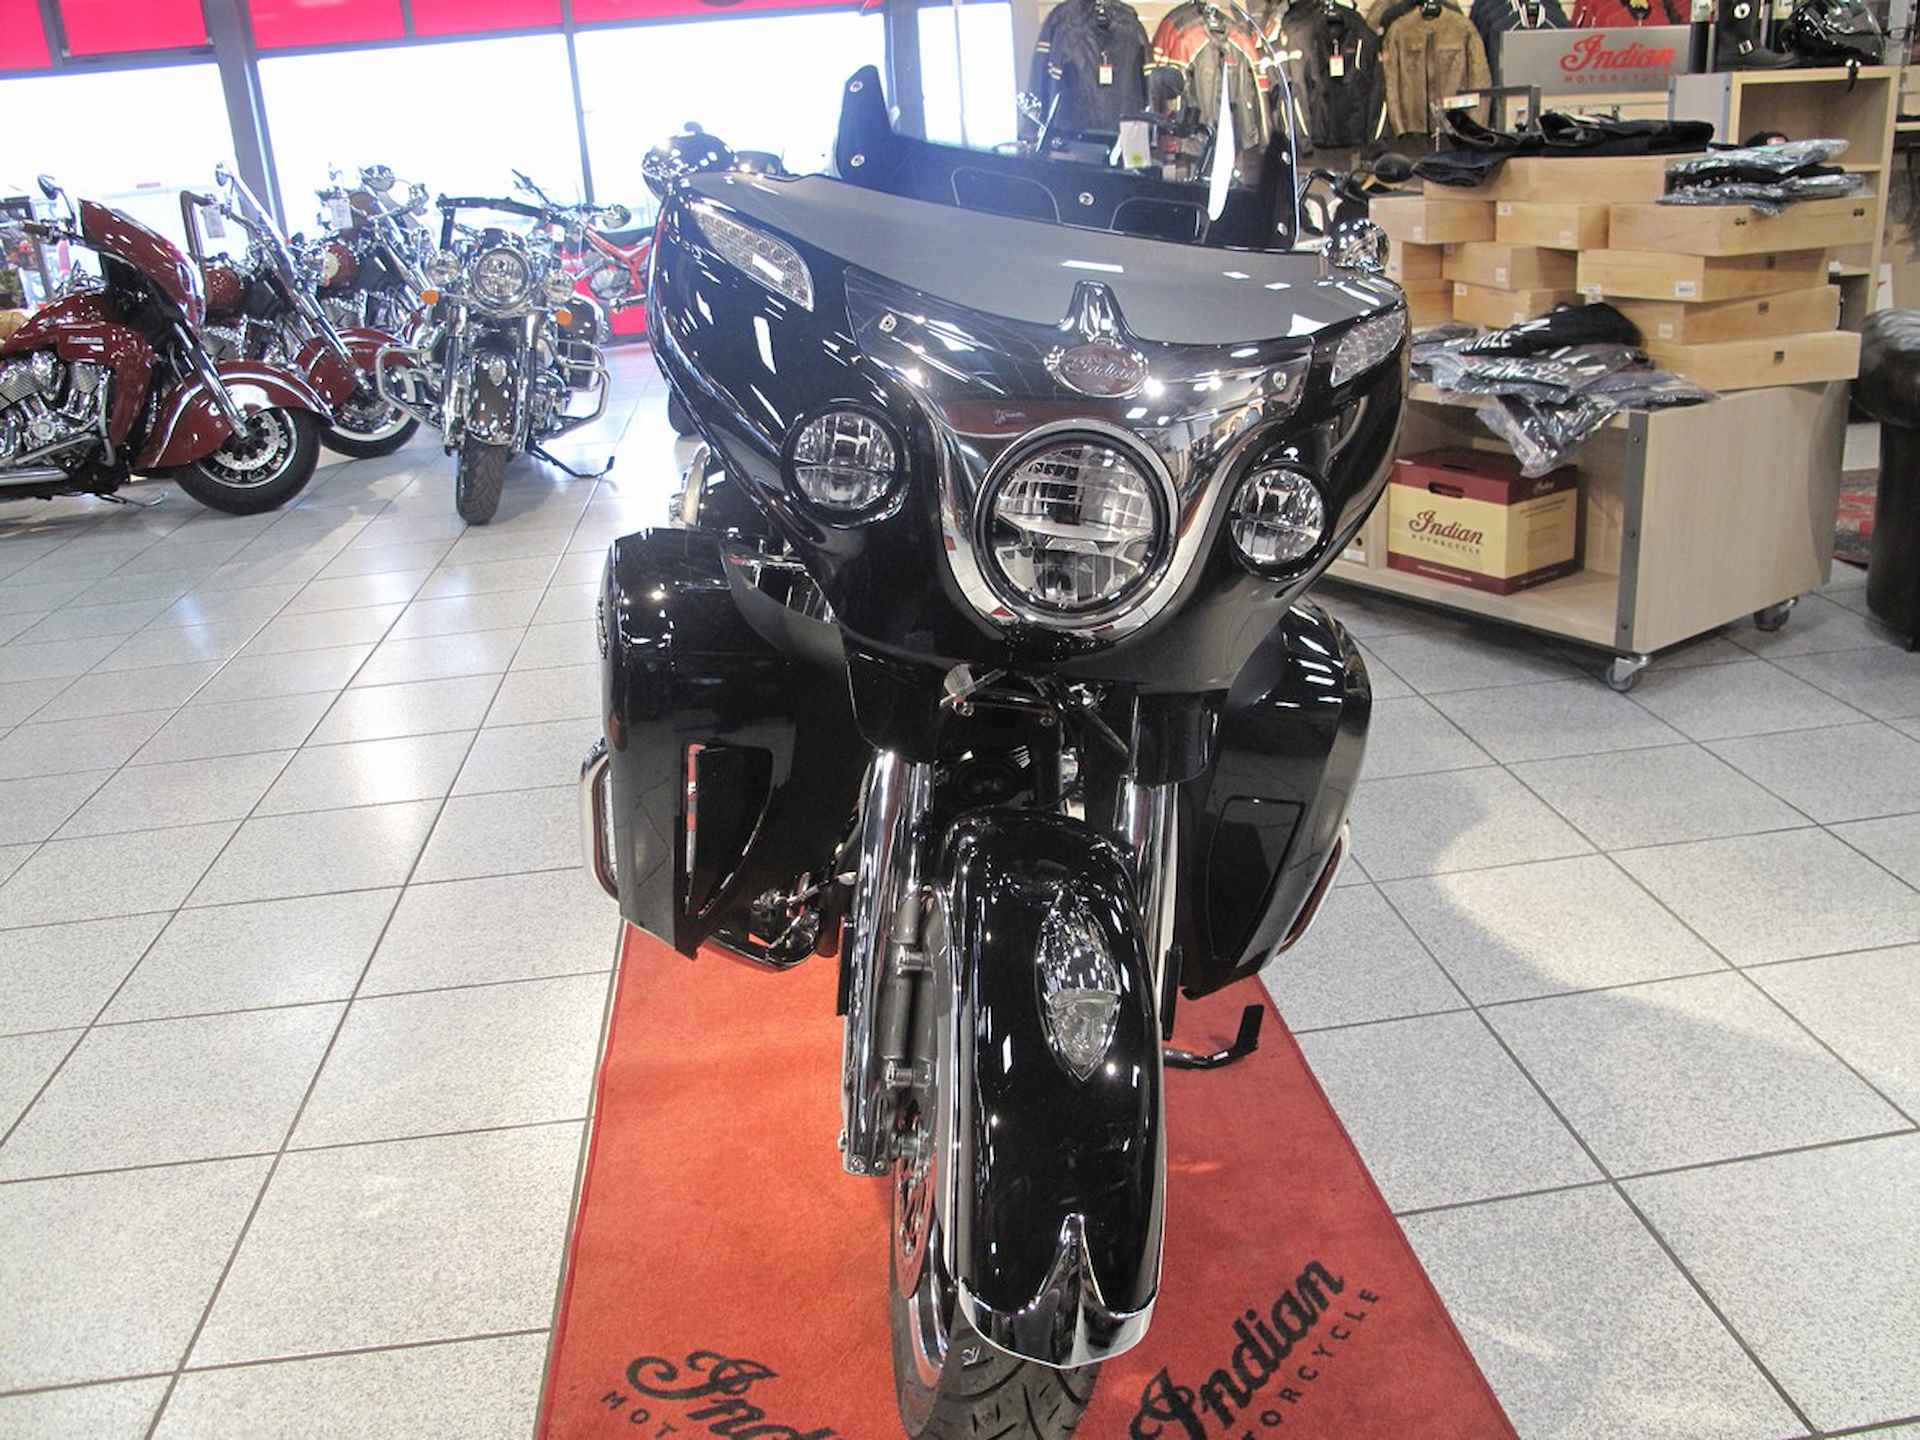 Indian Roadmaster Official Indian Motorcycle Dealer - 4/13